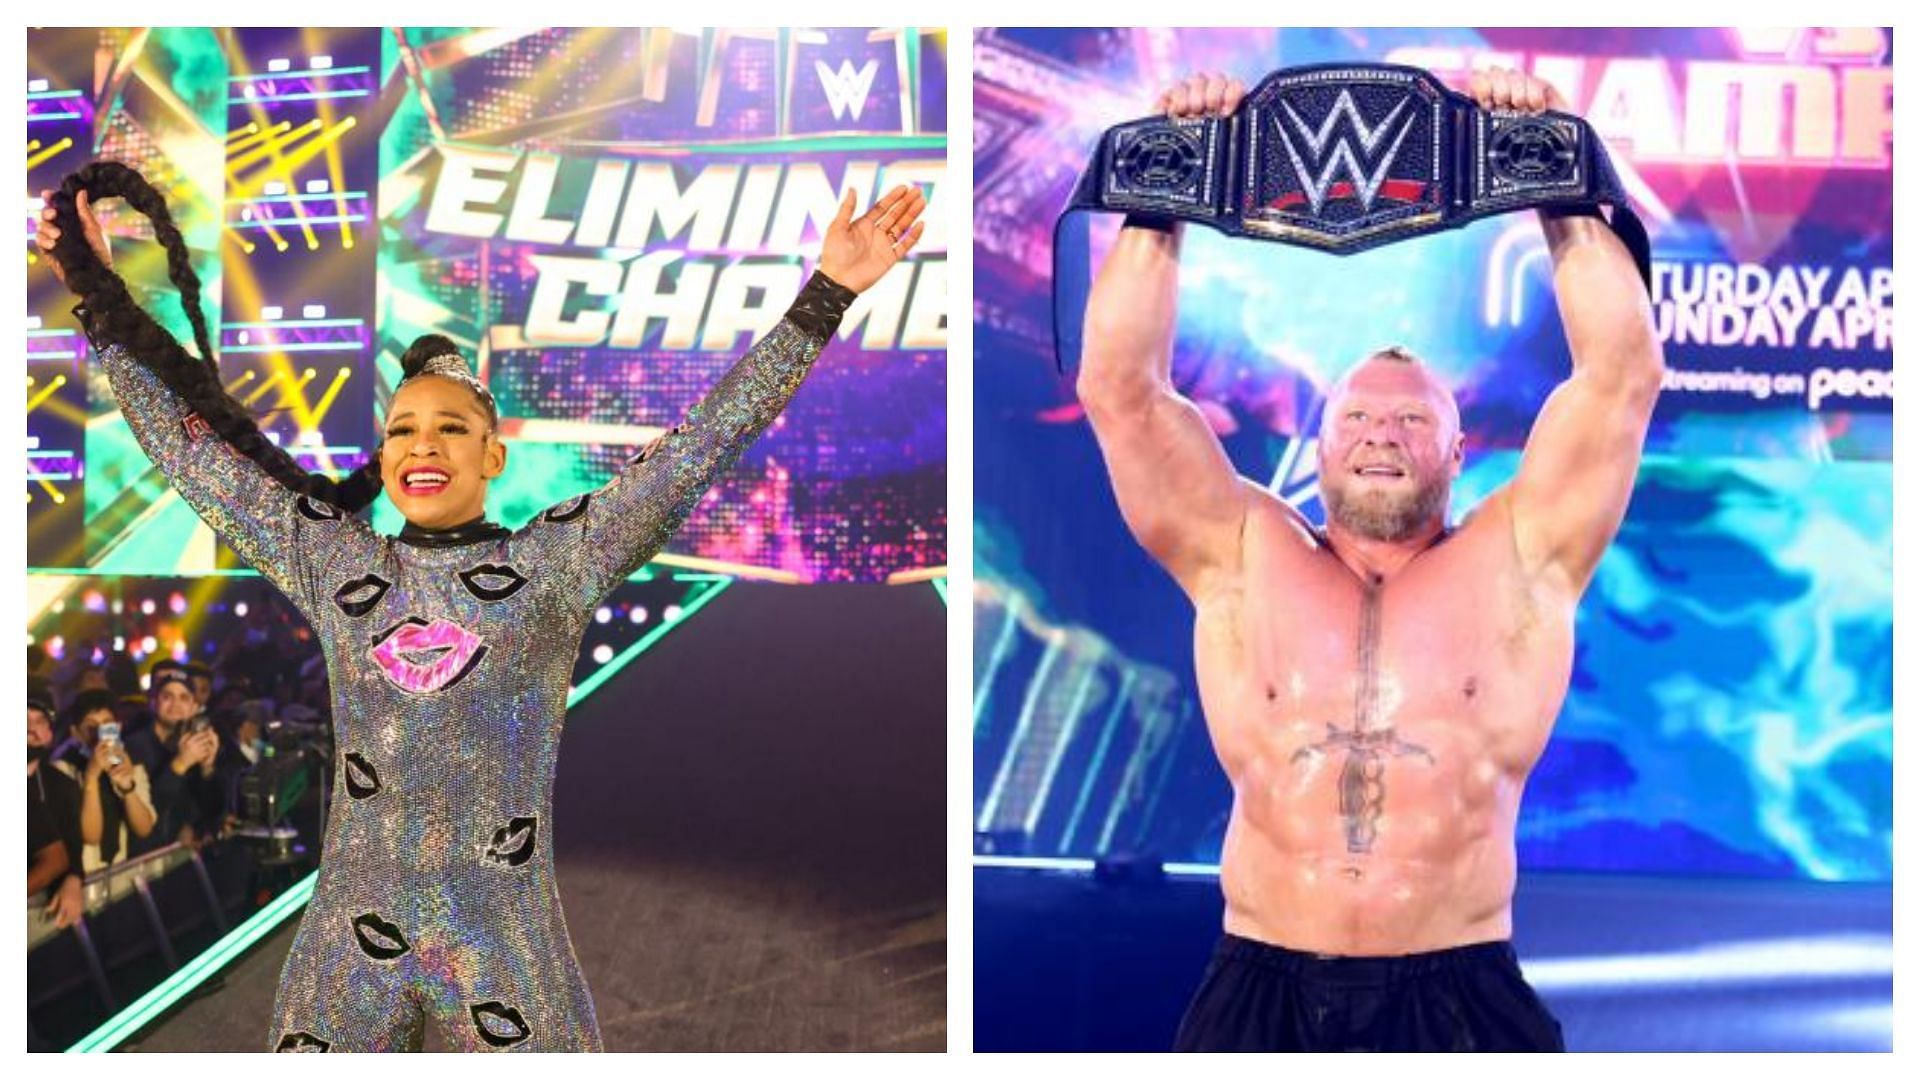 Bianca Belair and Brock Lesnar are major players on the Road to WrestleMania 38